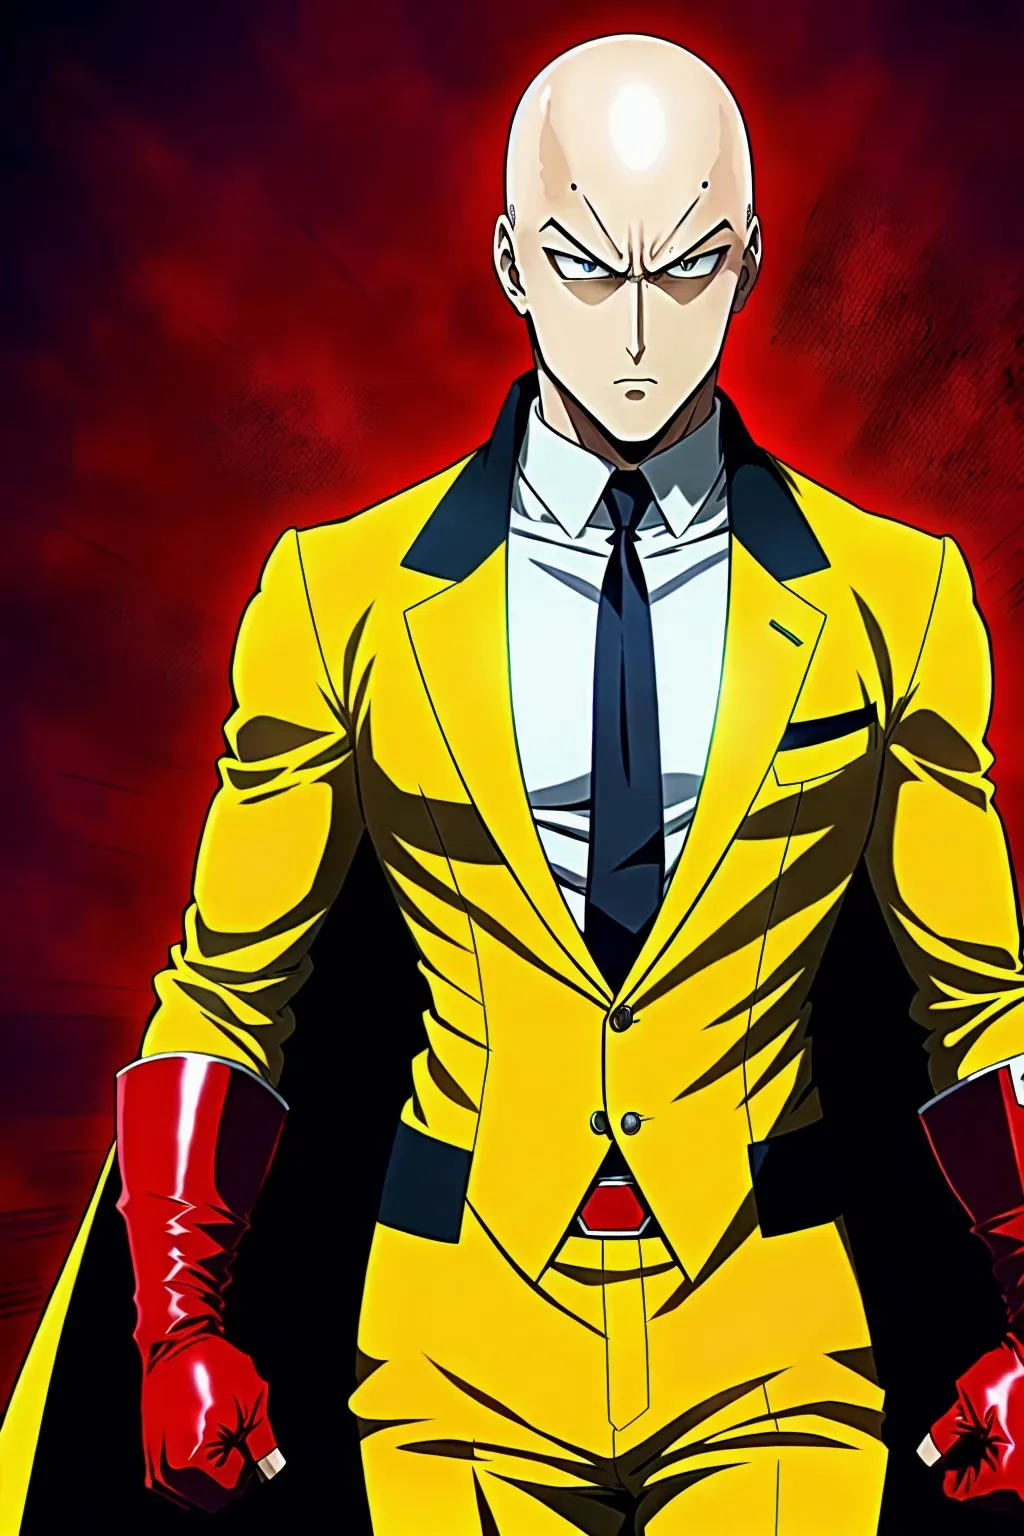 Dopamine Girl - One punch man, 8k wallpaper, best quality, ultra hd, global  lighting, hi-resolution, high quality, yellow suit, white flowing cape, red  gloves, red boots gZz7pDg1baD